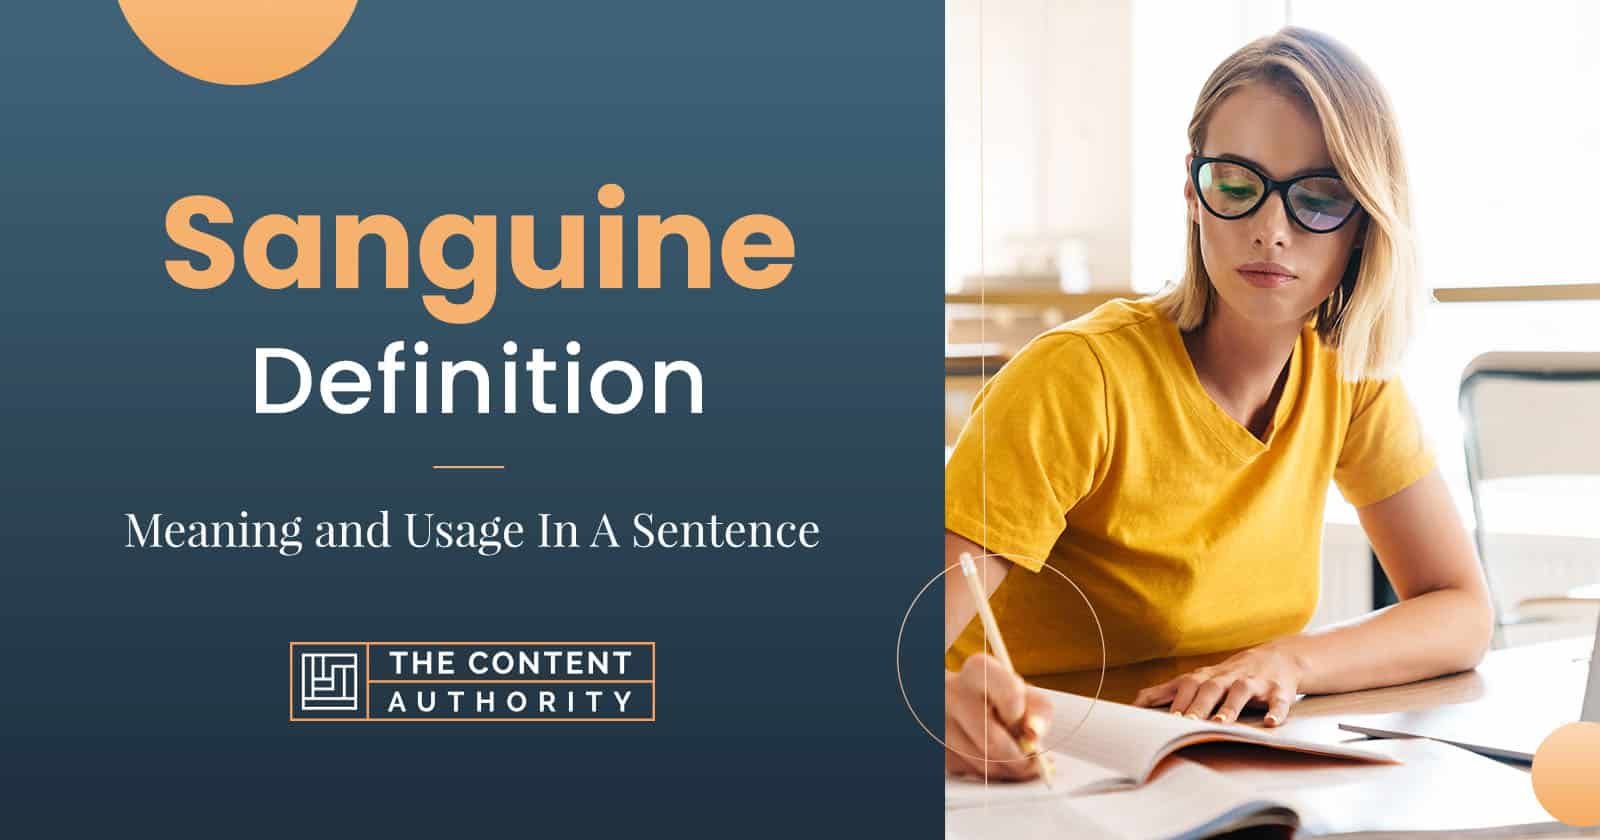 Sanguine Definition &#8211; Meaning and Usage in a Sentence